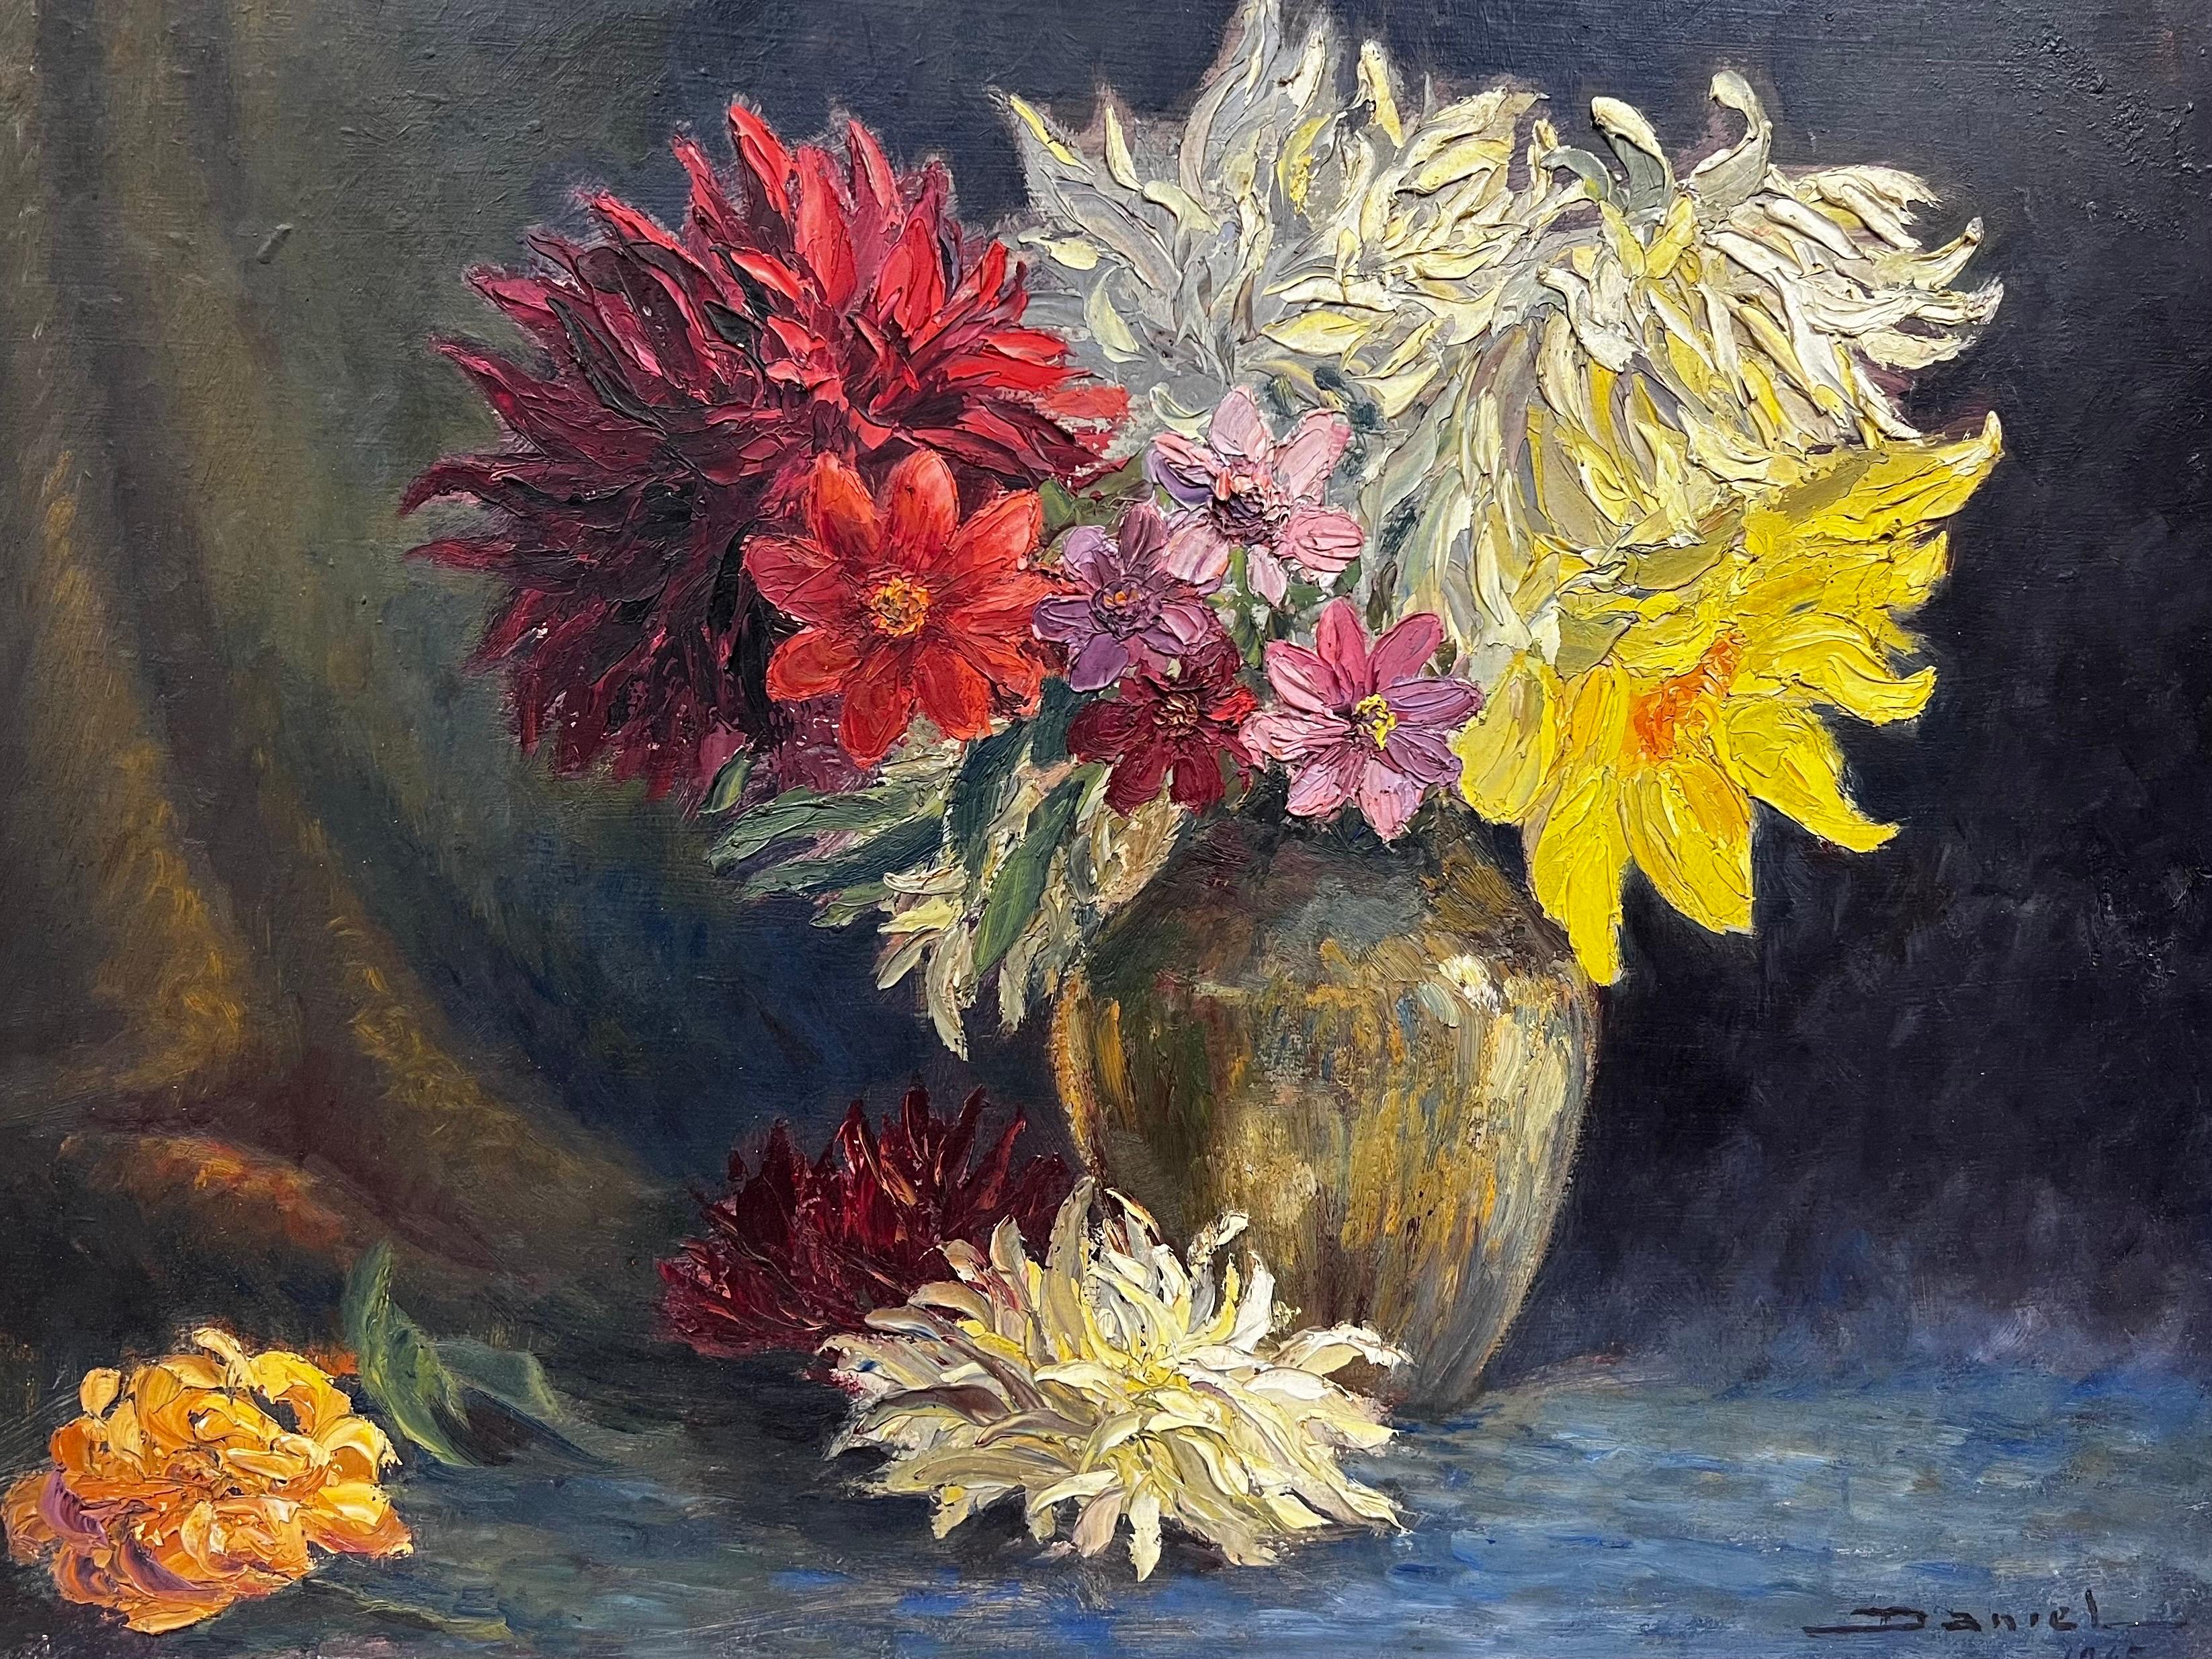 Artist/ School: French School, signed and dated 1945

Title: Post Impressionist thickly painted oil depicting vibrant flowers in a vase. Wonderful texture to the paintings surface. 

Medium: oil on board, framed 

Framed: 25 x 30.5 
Board: 18 x 24